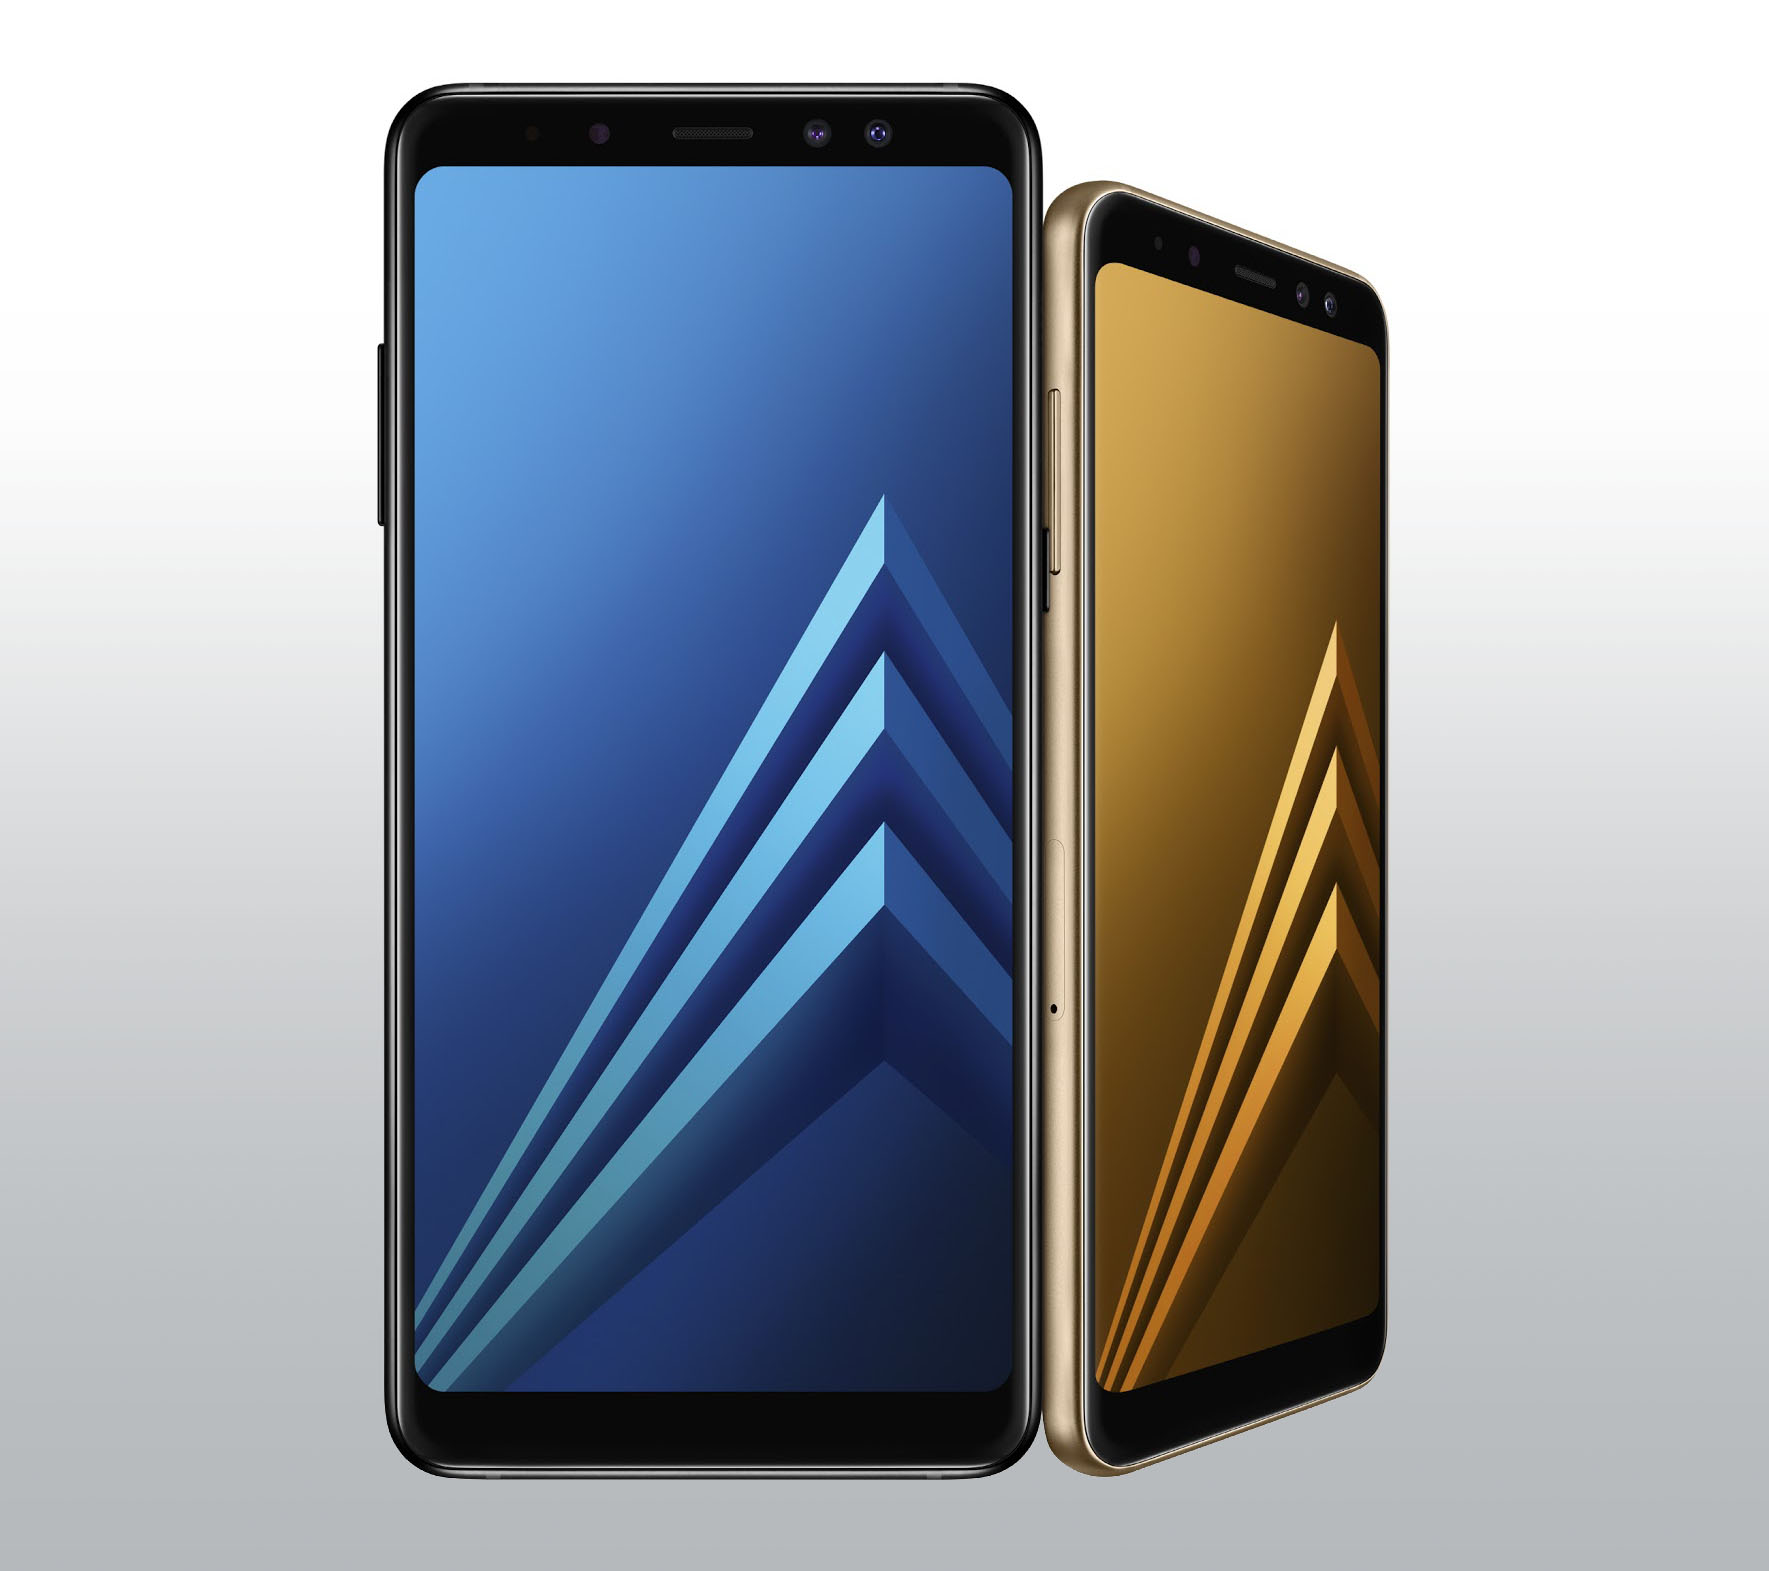 SAMSUNG Galaxy A8 and A8+ now available nationwide